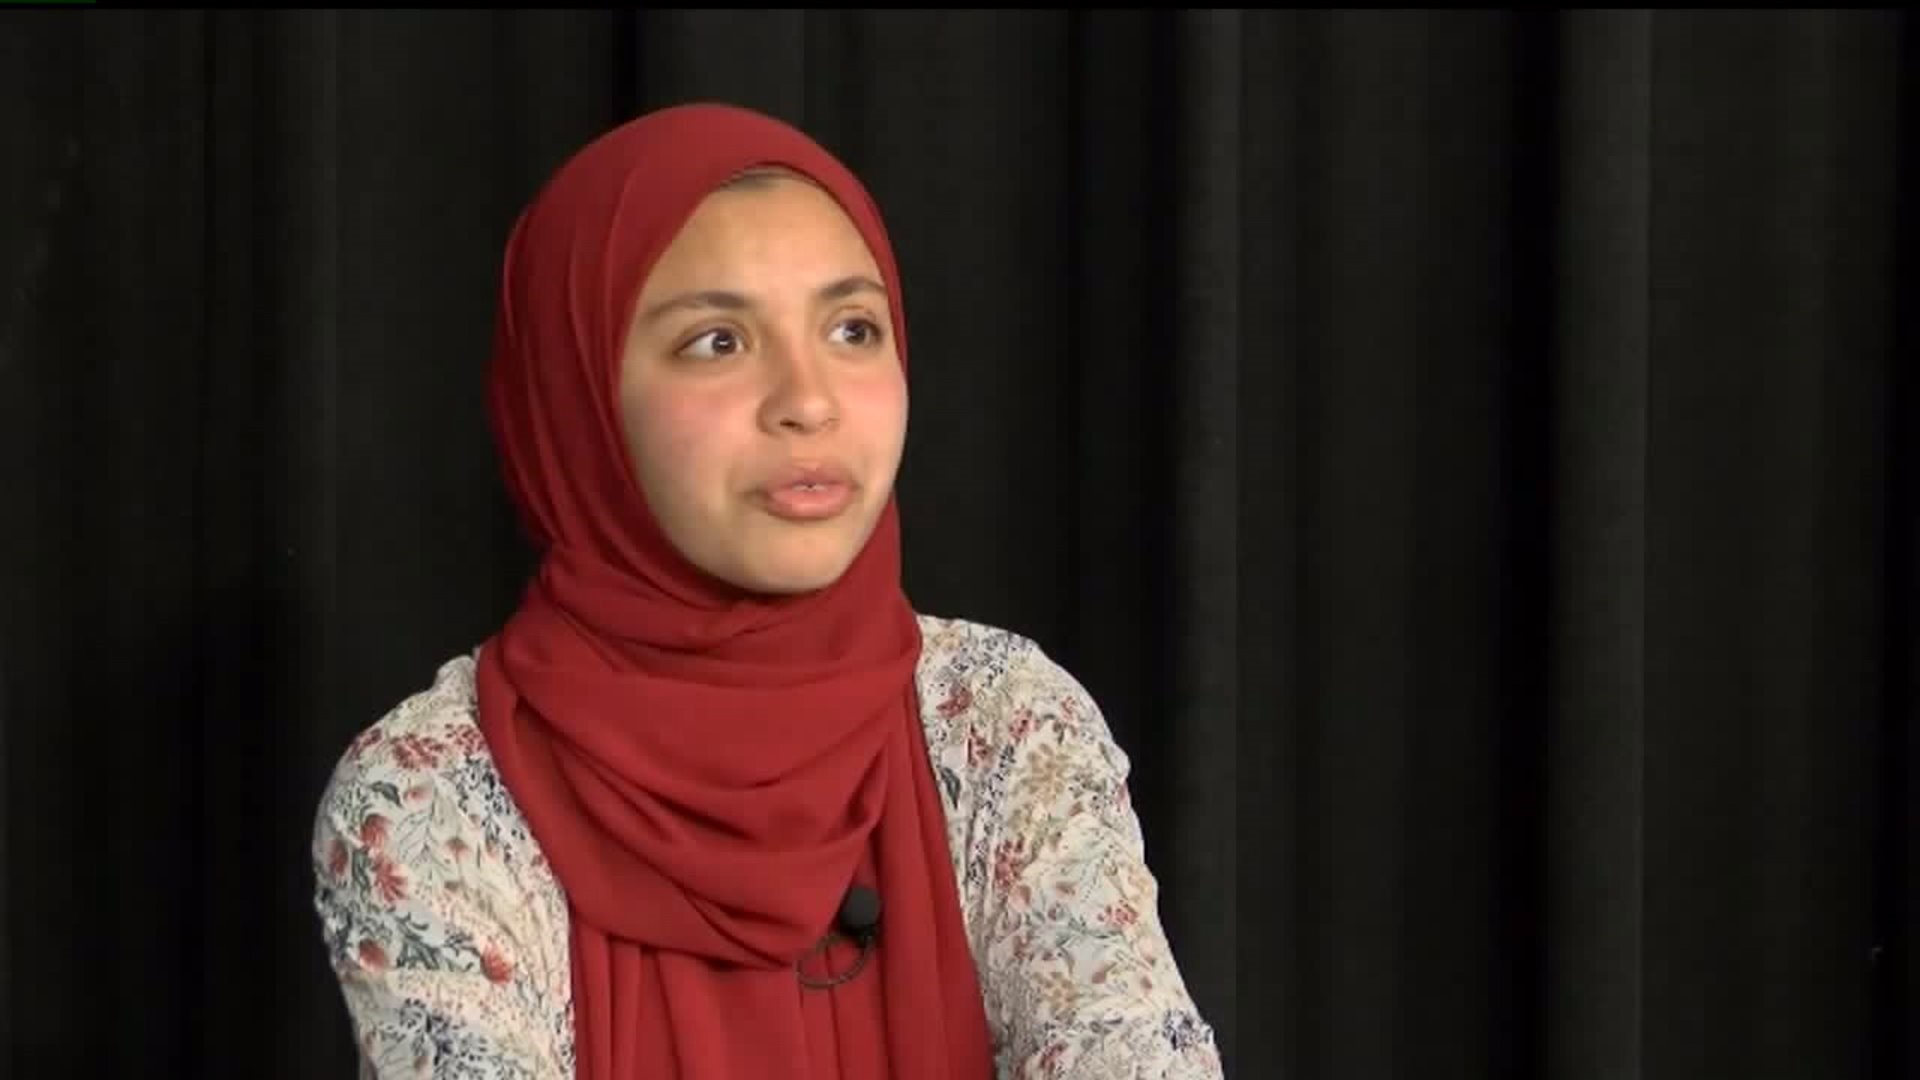 Ohio high school runner disqualified for wearing hijab